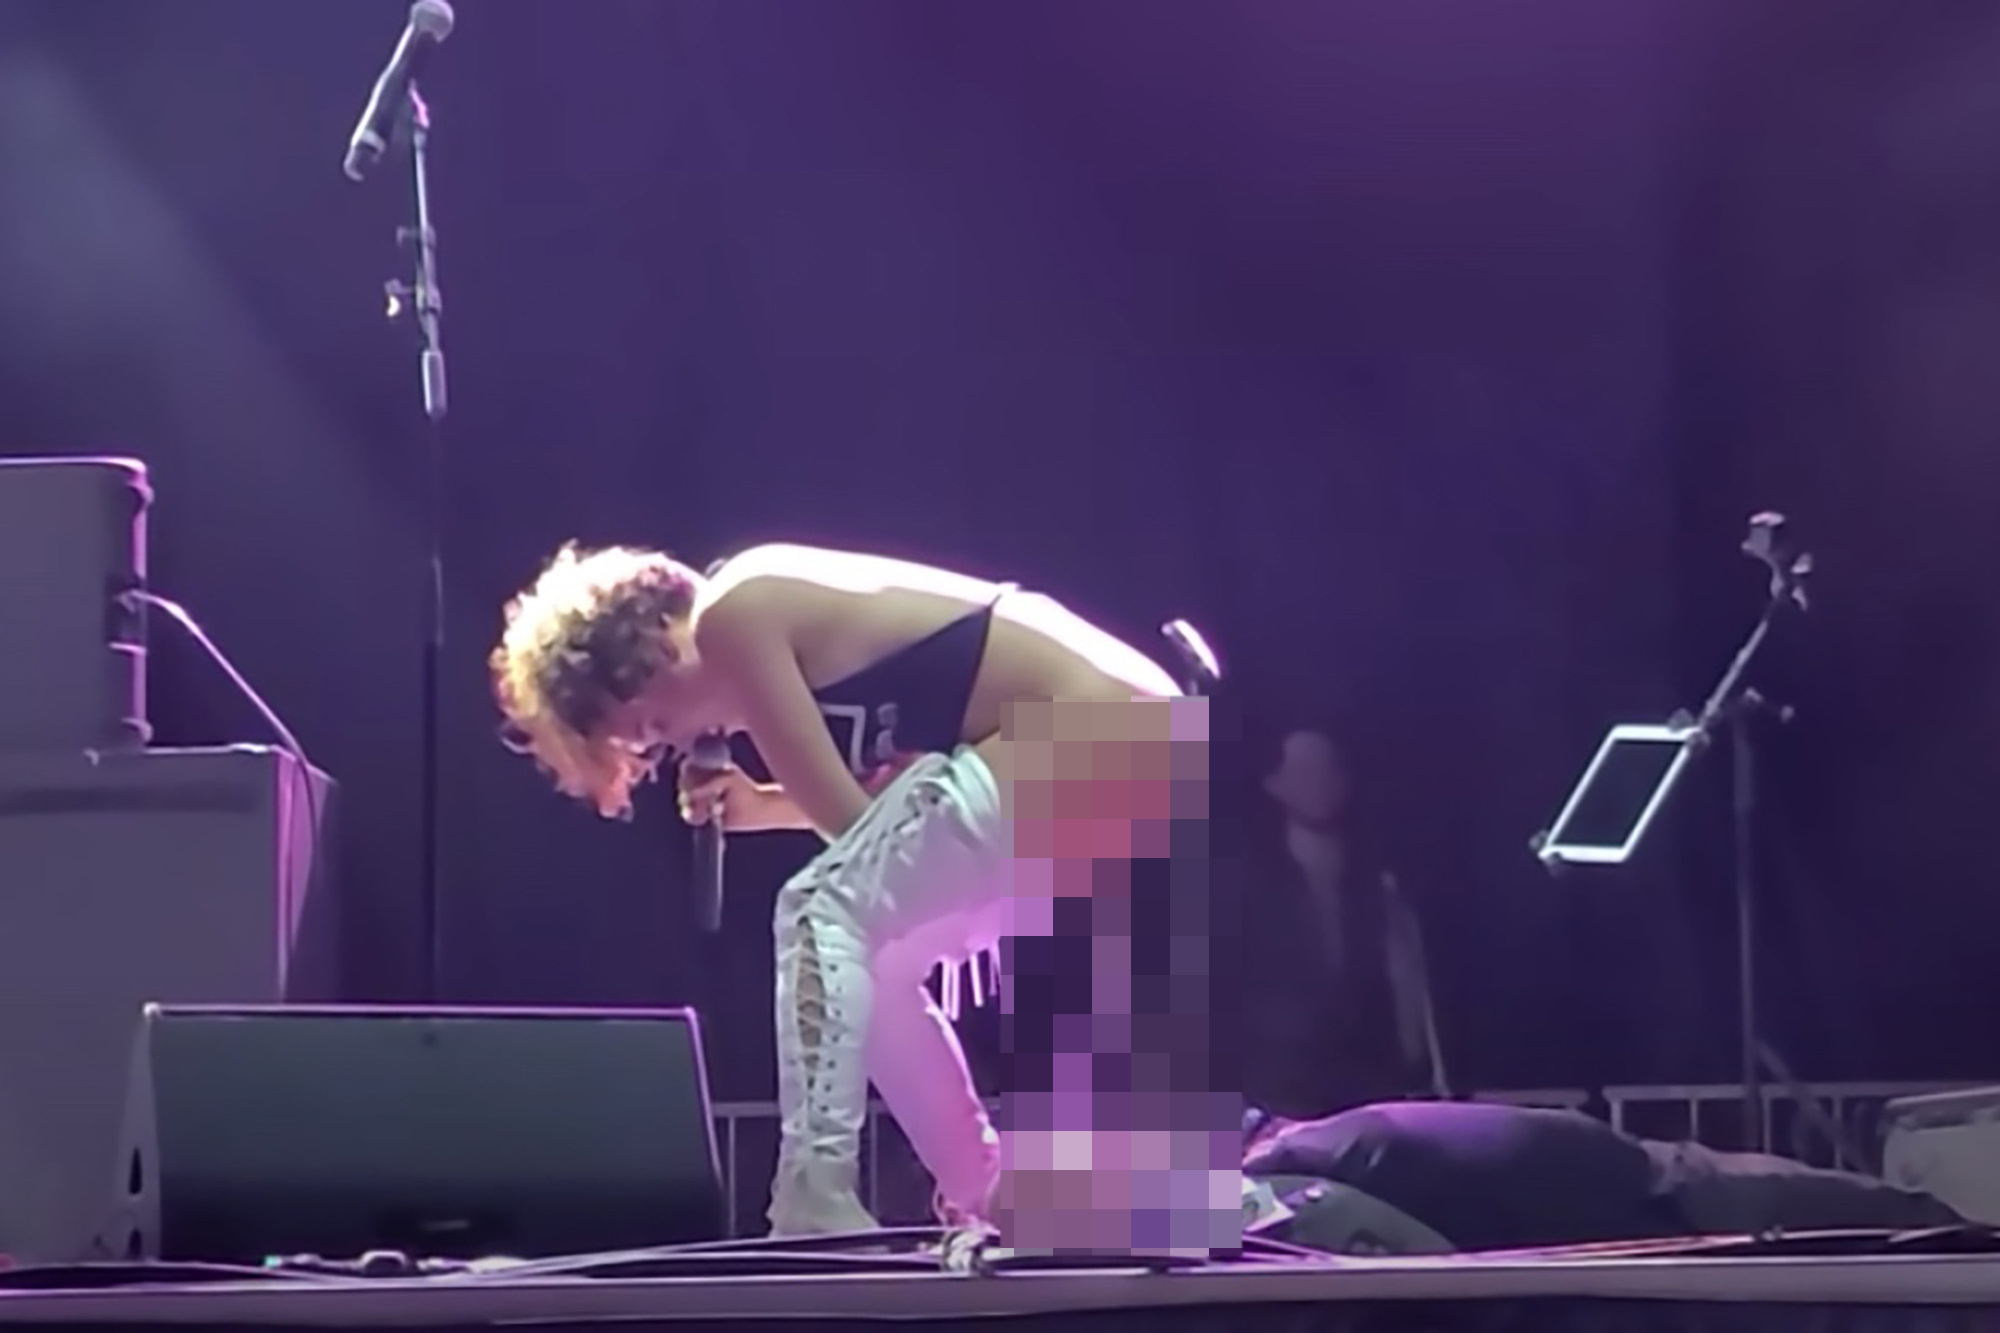 Singer Sophia Urista urinates on fan’s face on stage, says sorry after outcry